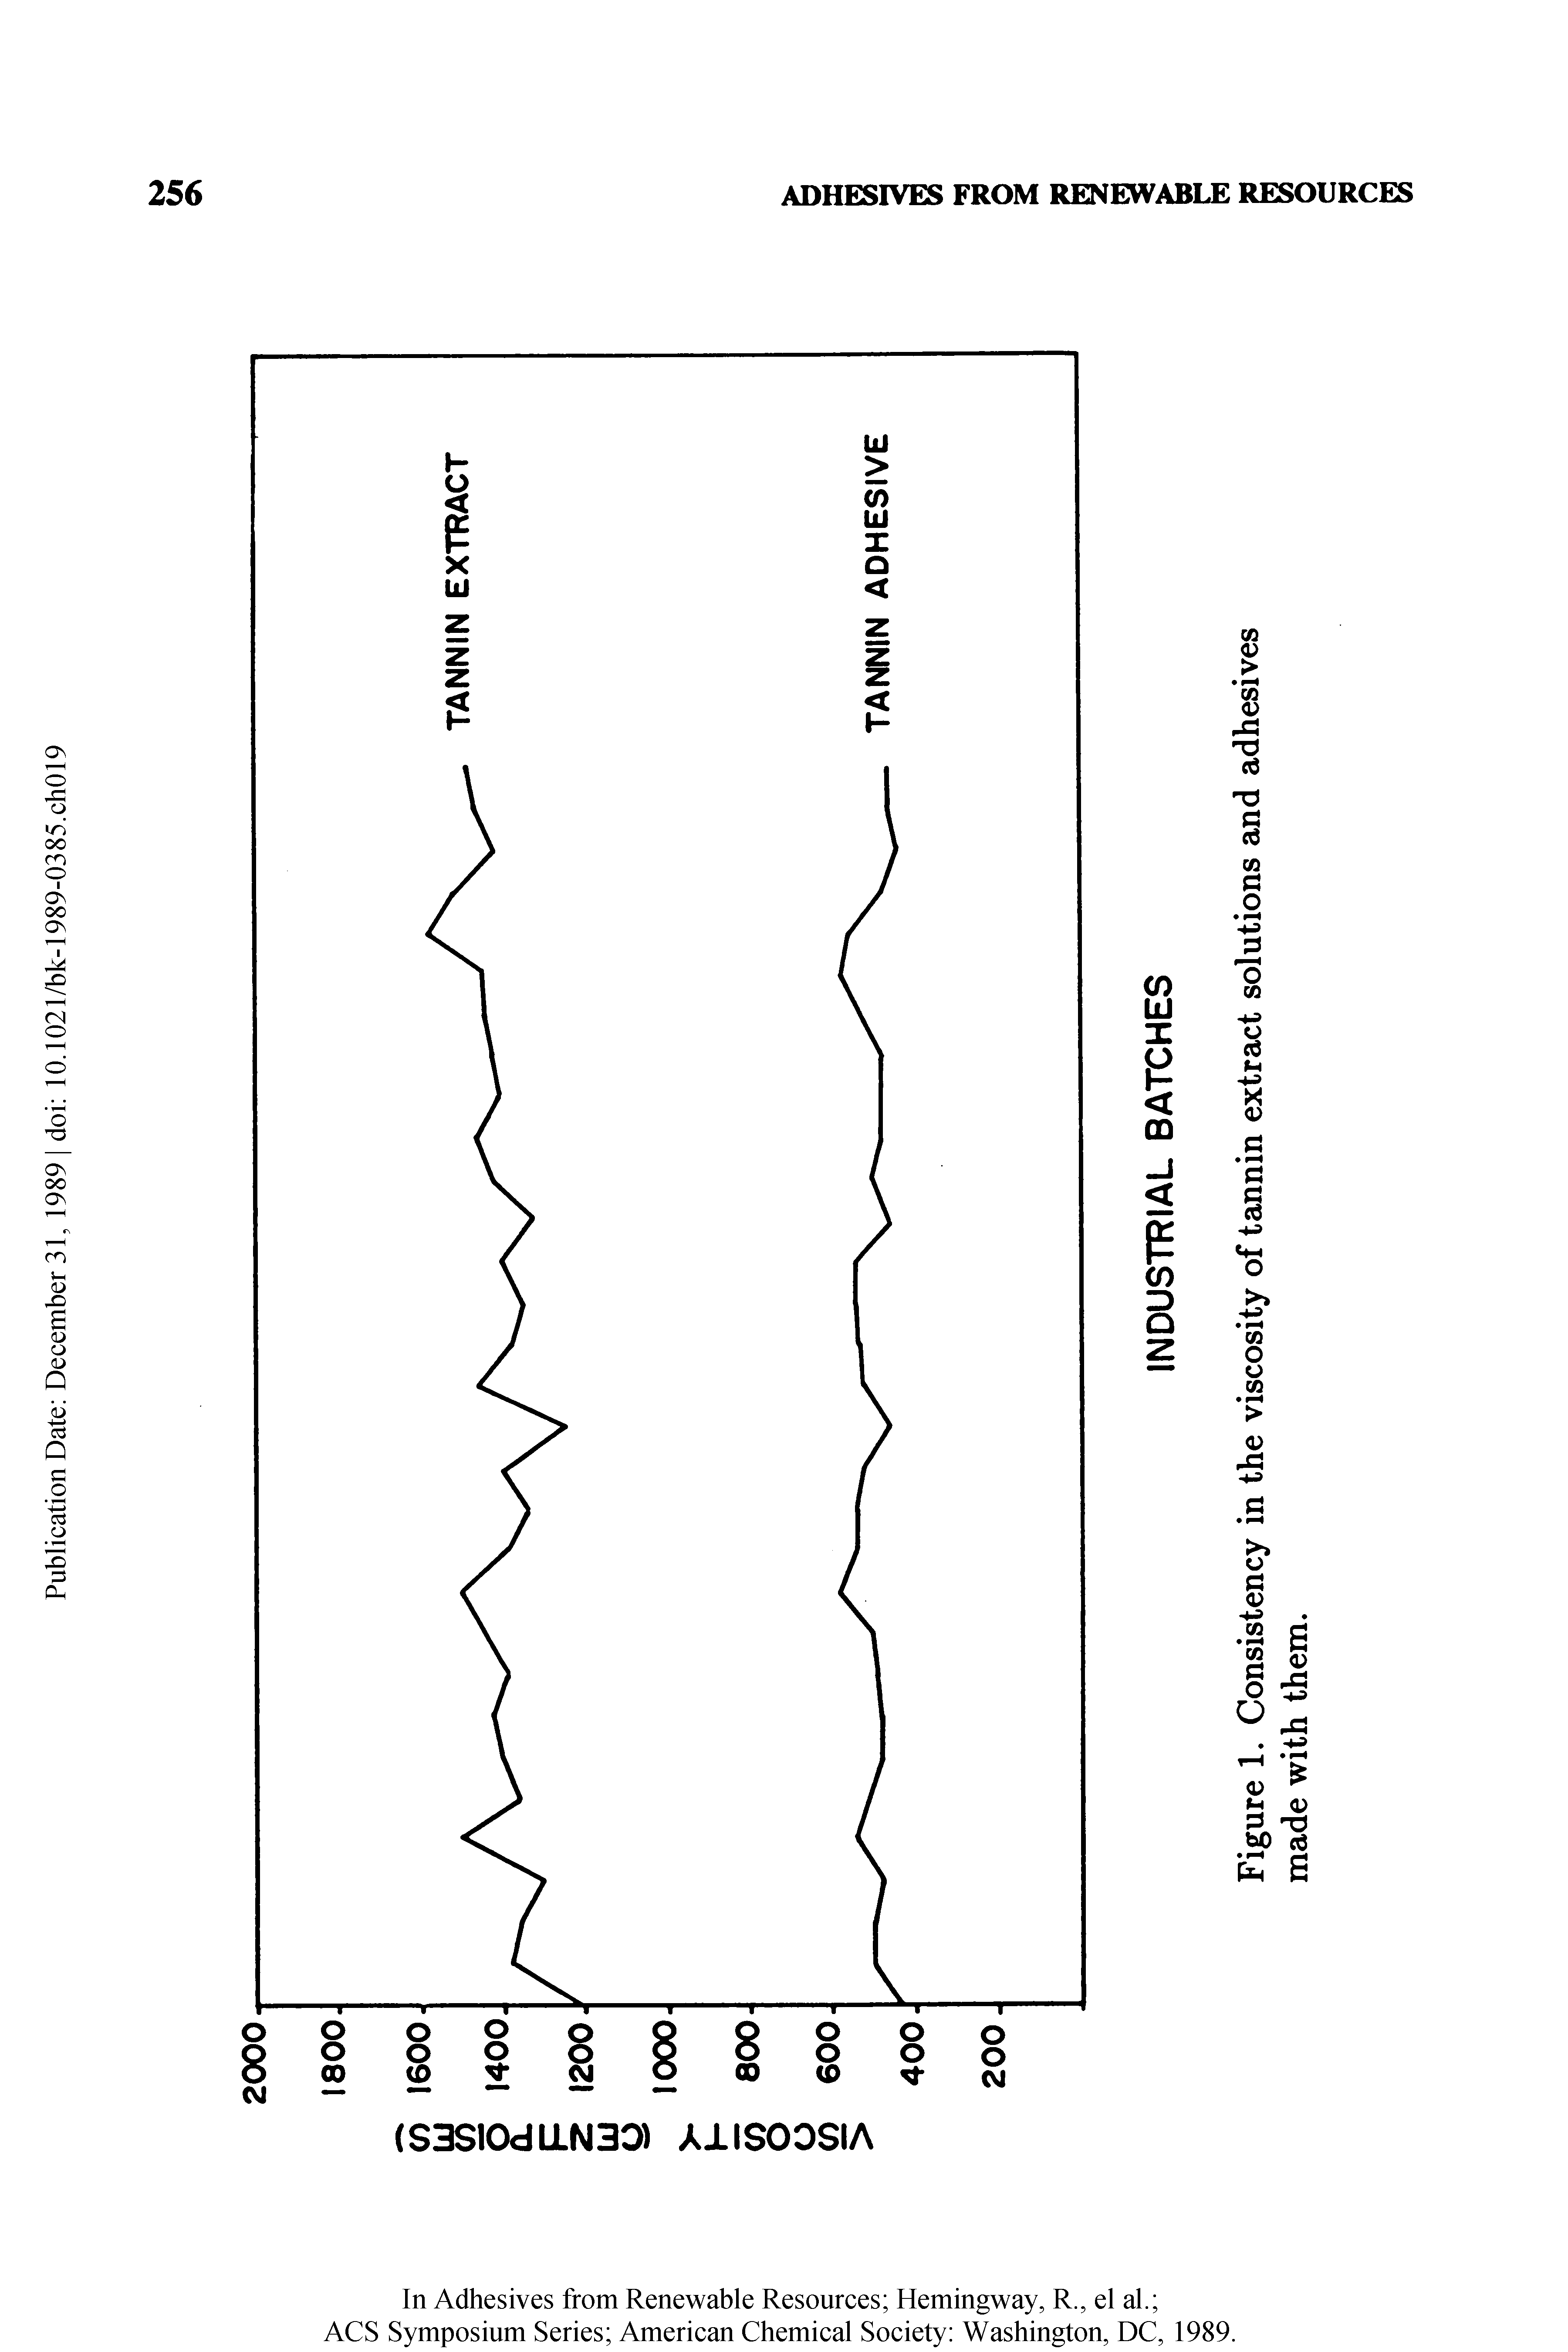 Figure 1. Consistency in the viscosity of tannin extract solutions and adhesives made with them.